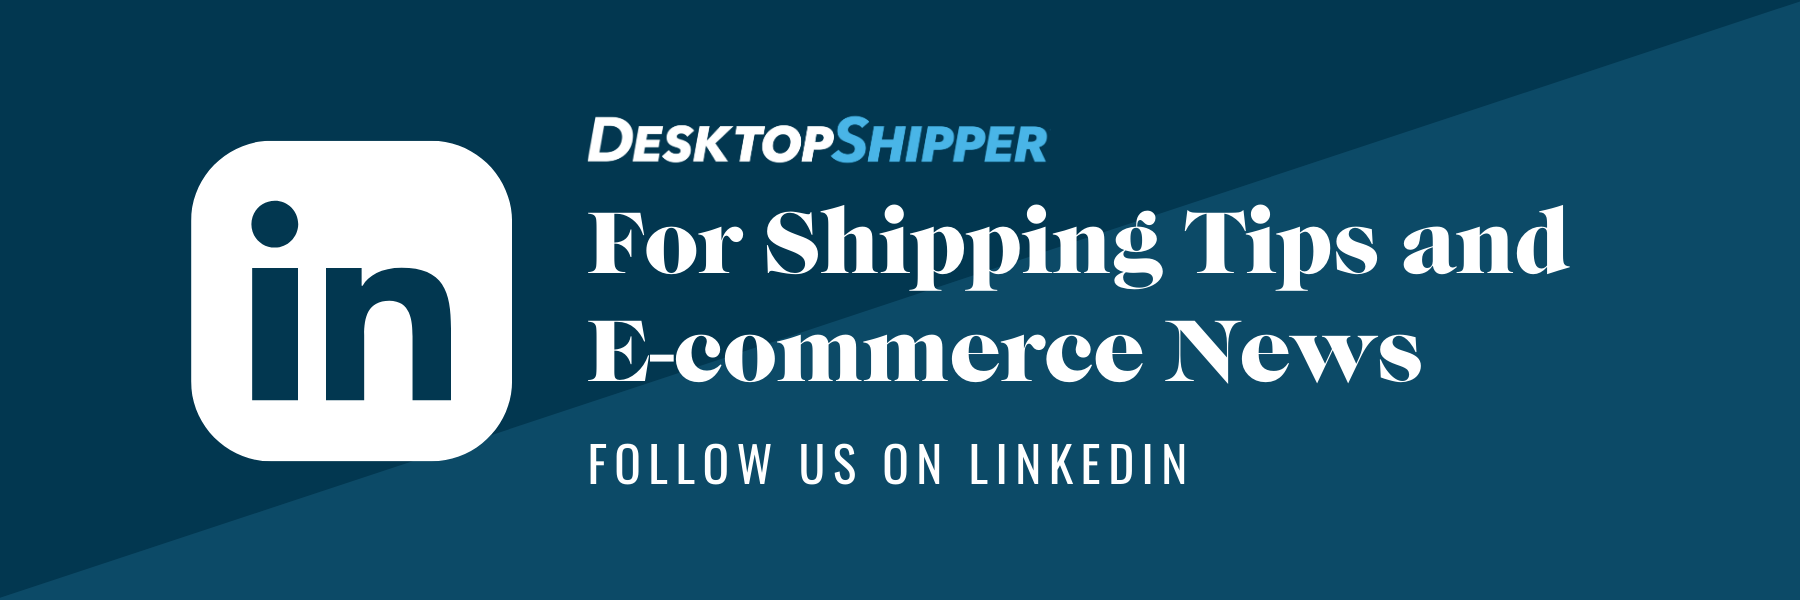 Follow DesktopShipper on LinkedIn for Shipping and Ecommerce Tips and News